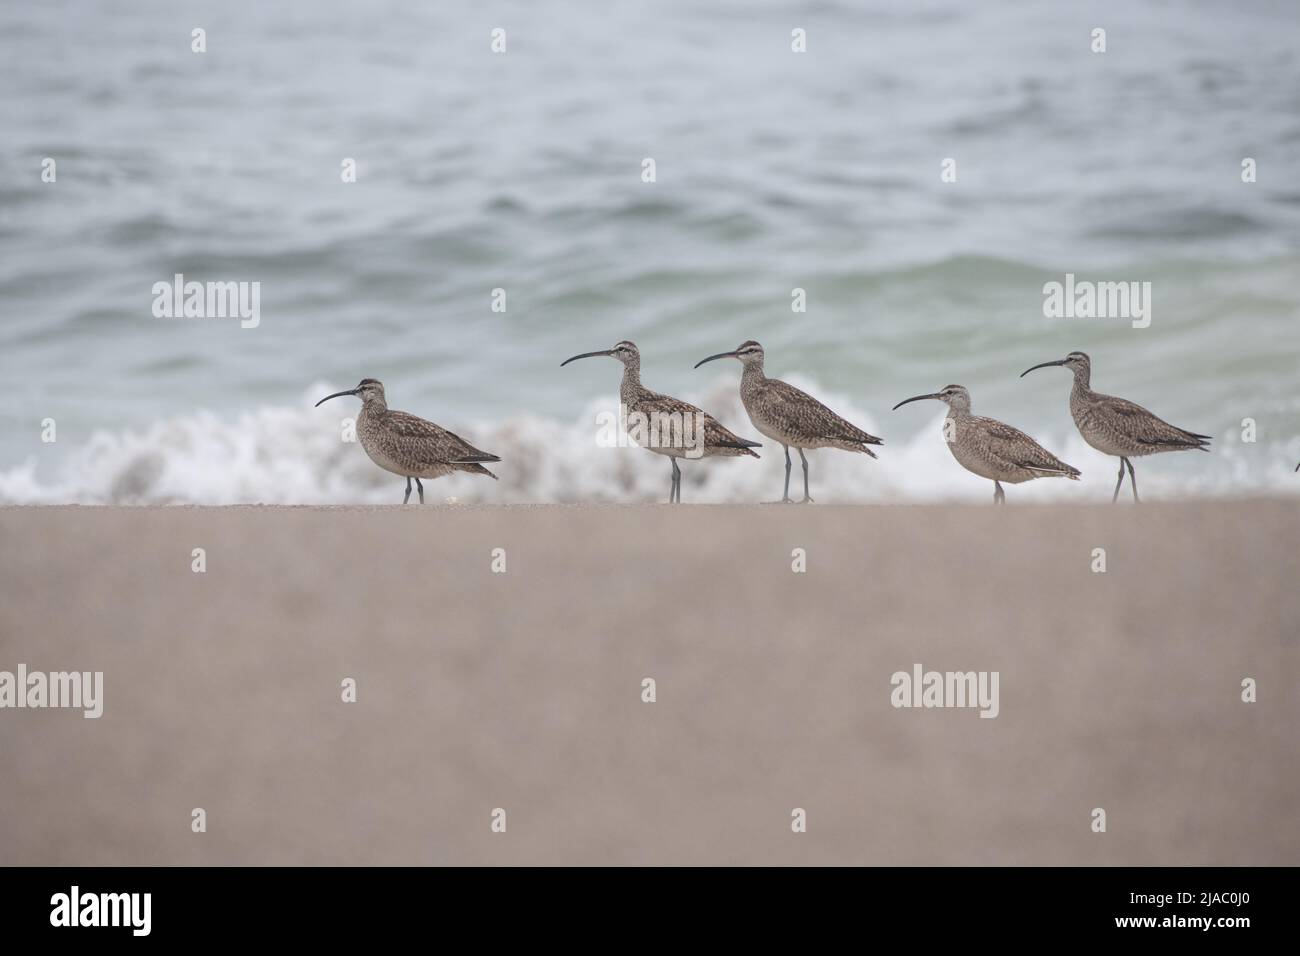 A flock of American Whimbrel (Numenius phaeopus hudsonicus) on the beach near the Pacific ocean in Point Reyes National seashore, California, USA. Stock Photo